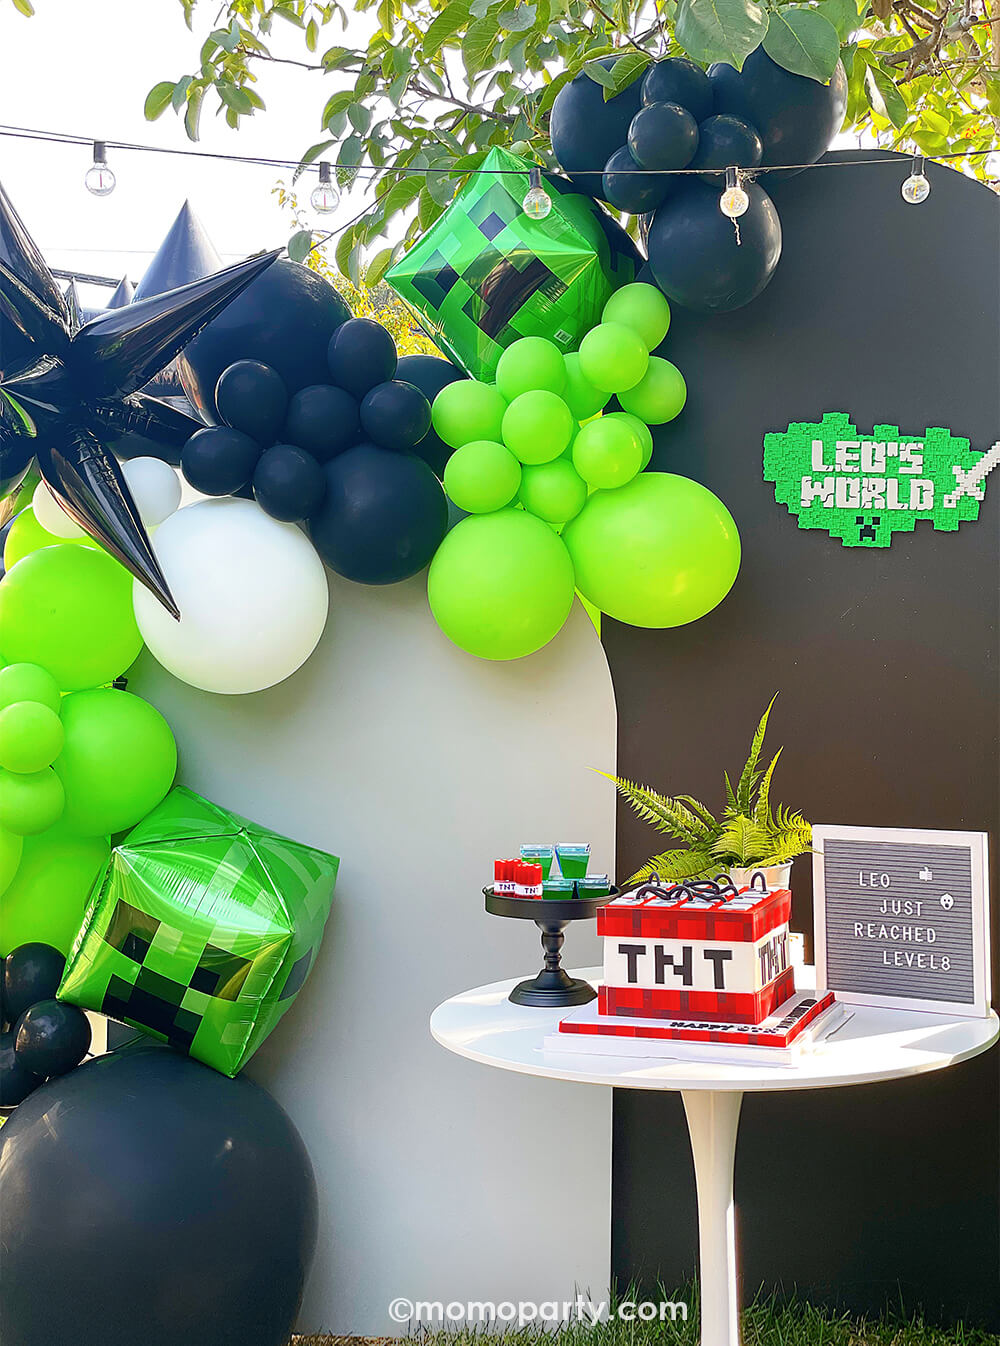 Kid's Minecraft themed Birthday Outdoor Party Ideas by Momo Party. Featuring Backdrop board in black and grey, decorated with minecraft themed color balloons in green, black, white, and creeper foil balloon, black starburst foil balloons. A TNT cake with letter board on the white round dessert table . In the front there is a kids picnic table filled with minecraft themed party plates with Minecraft Twist Poppers on top, cups, Creeper napkins and pixel TNT theme goodie bags on the black stripe table runner.